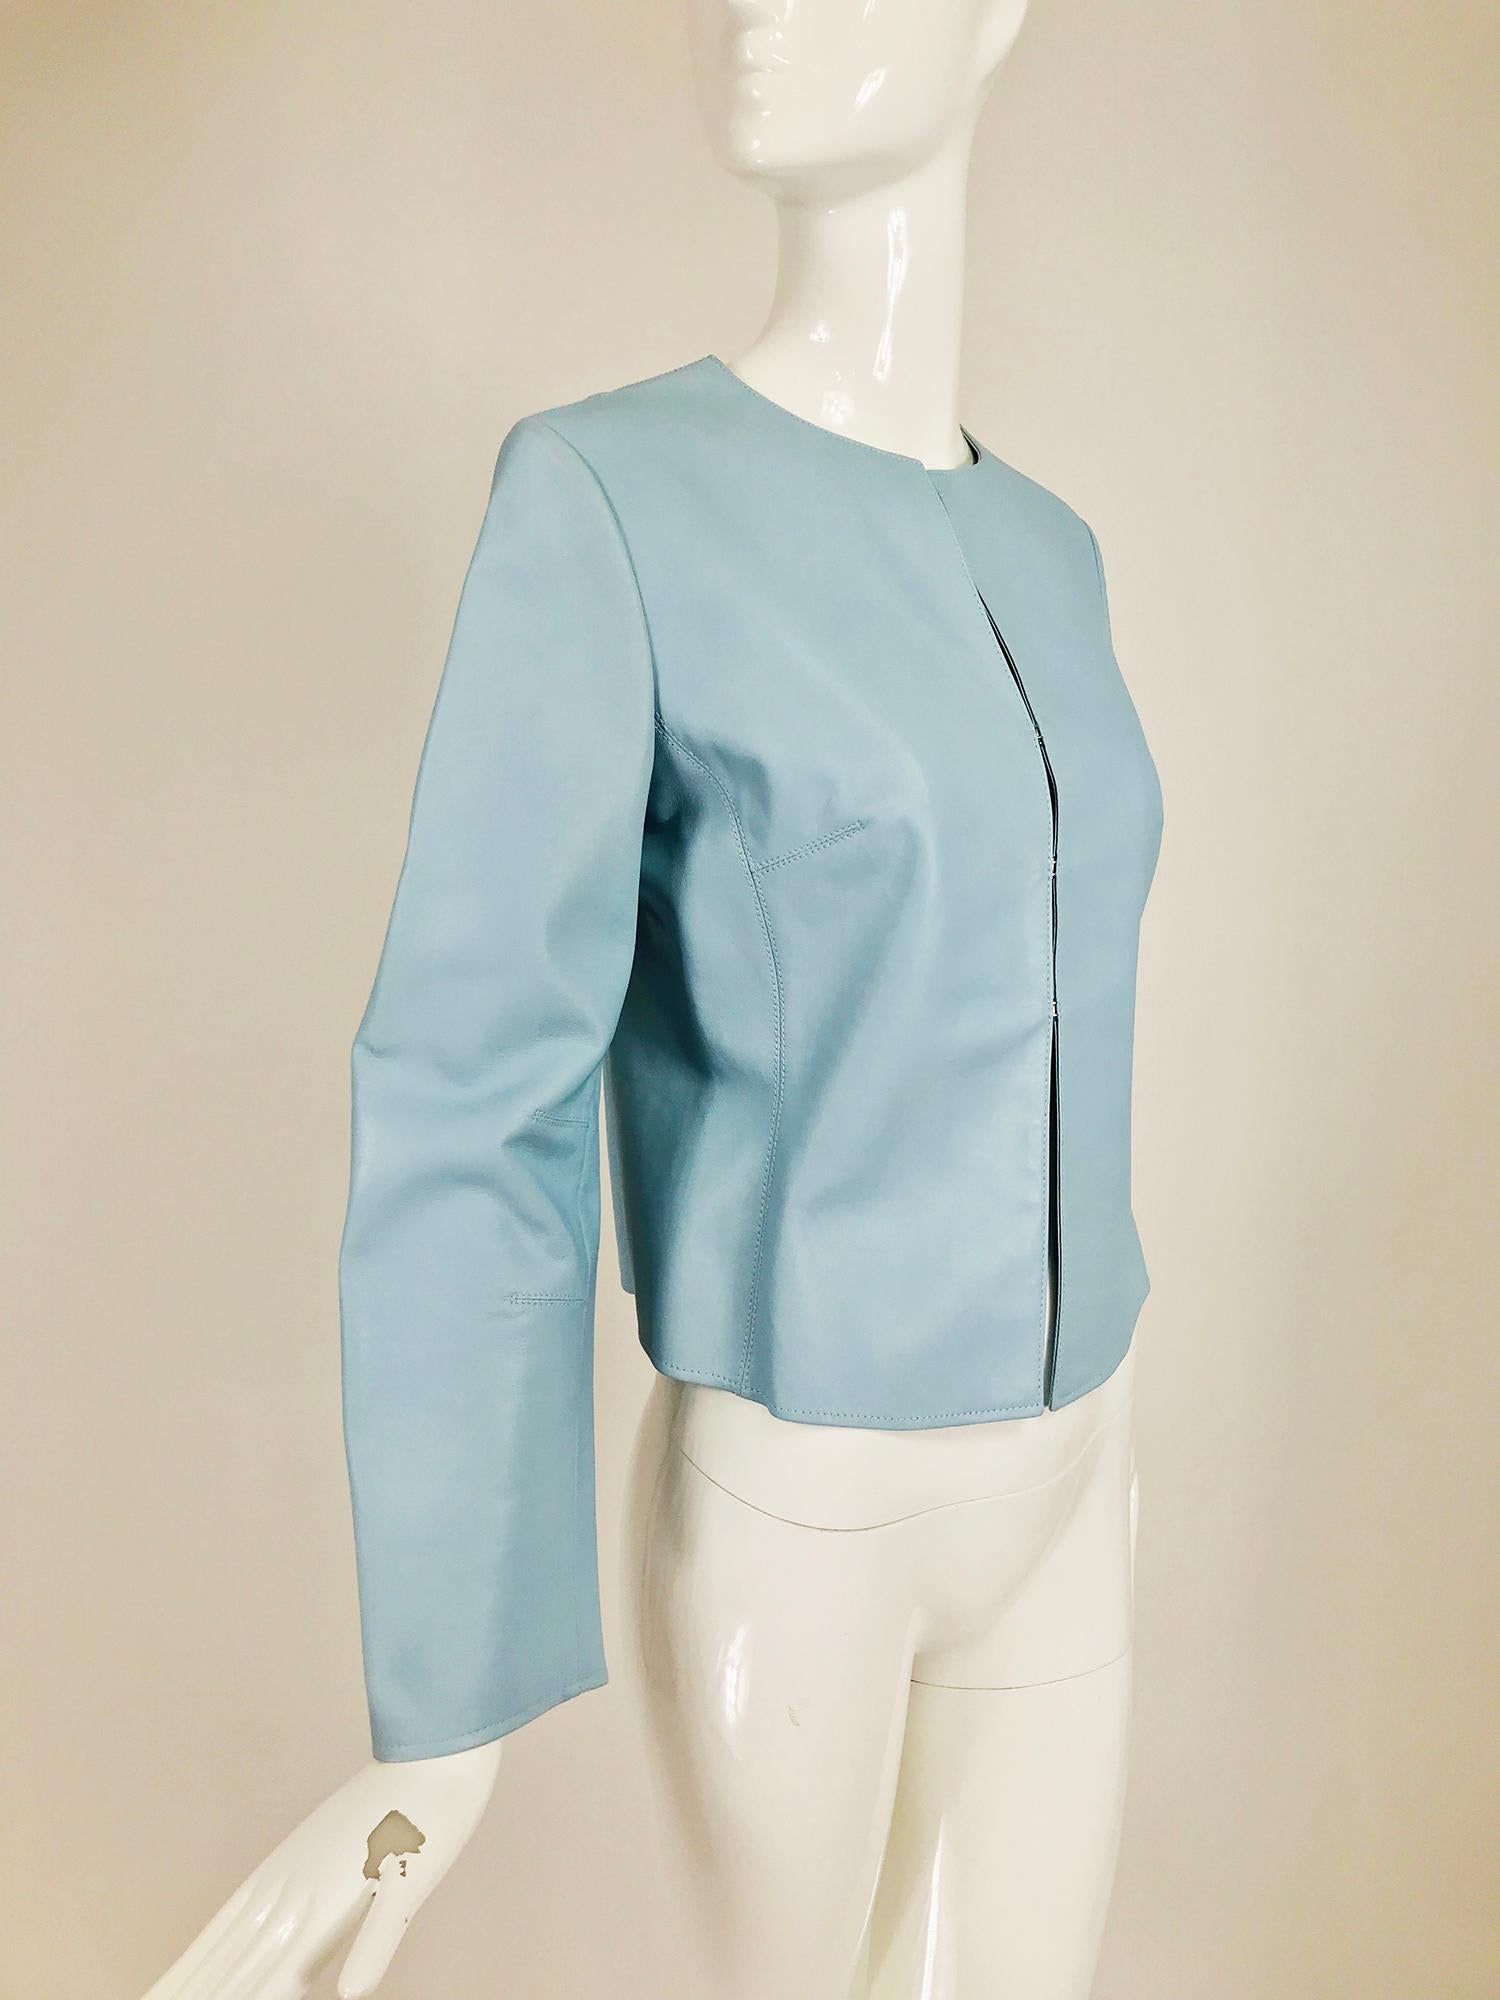 Giorgio Armani pale blue lambskin jacket. Jewel neckline, long sleeves, top stitch detail. Soft lambskin with bonded lining, finished seams inside. Looks barely, if ever, worn.Closes at the front with large silver hook and eyes.  Marked size 40.
   